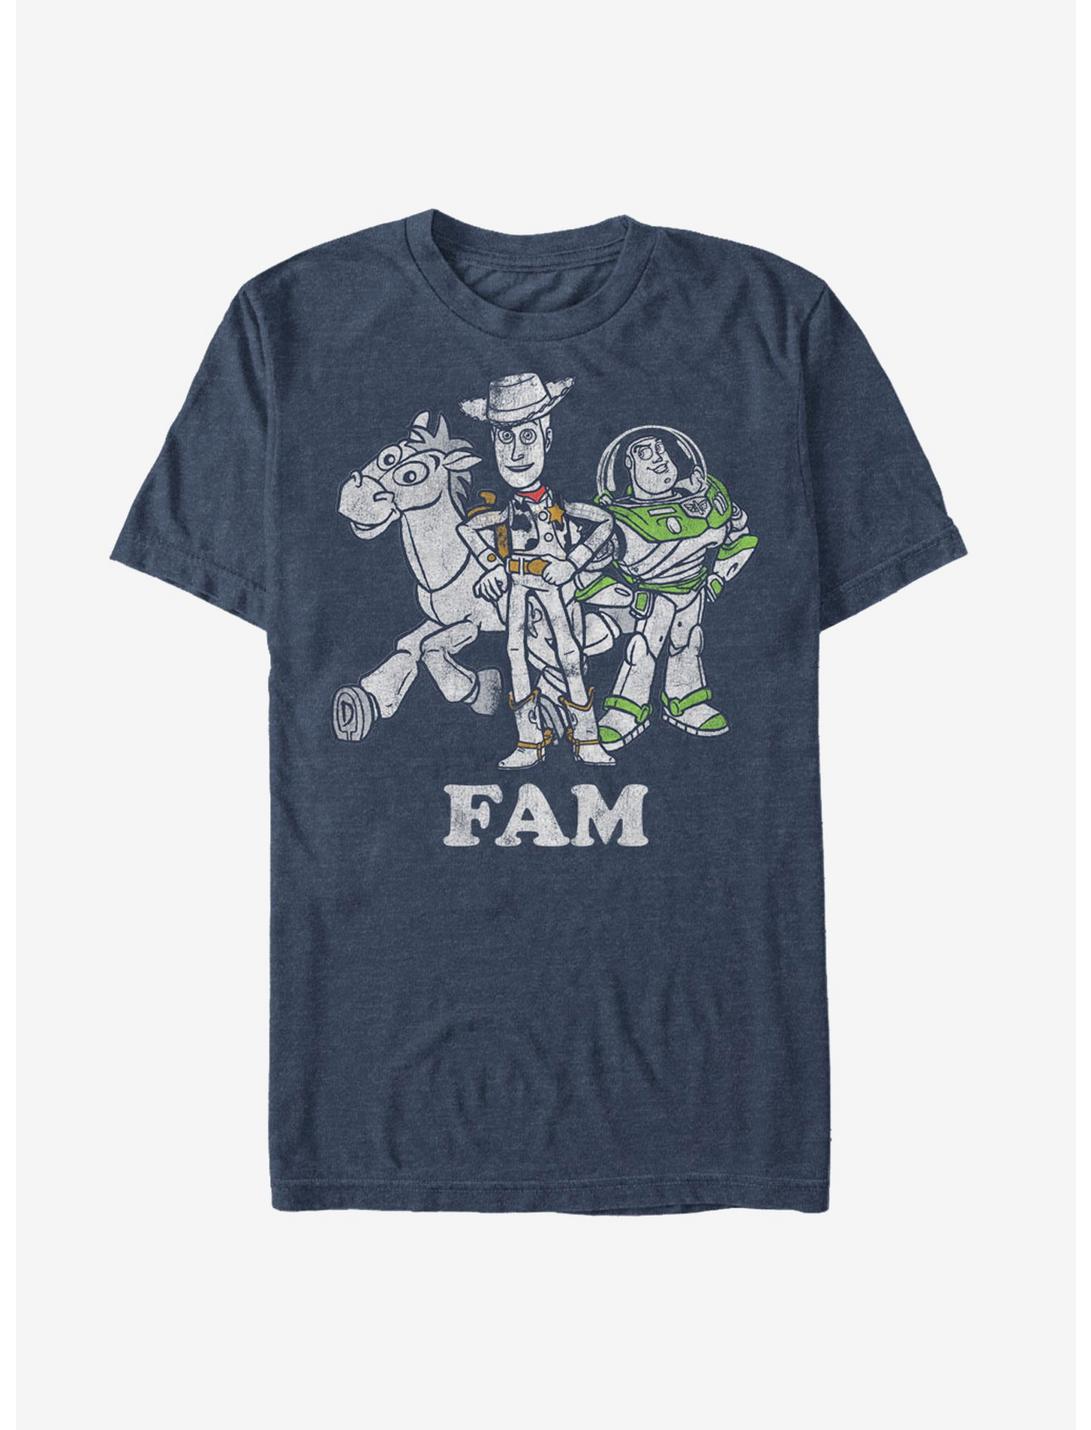 Toy Story Buzz Lightyear and Woody Fam T-Shirt, NAVY HTR, hi-res